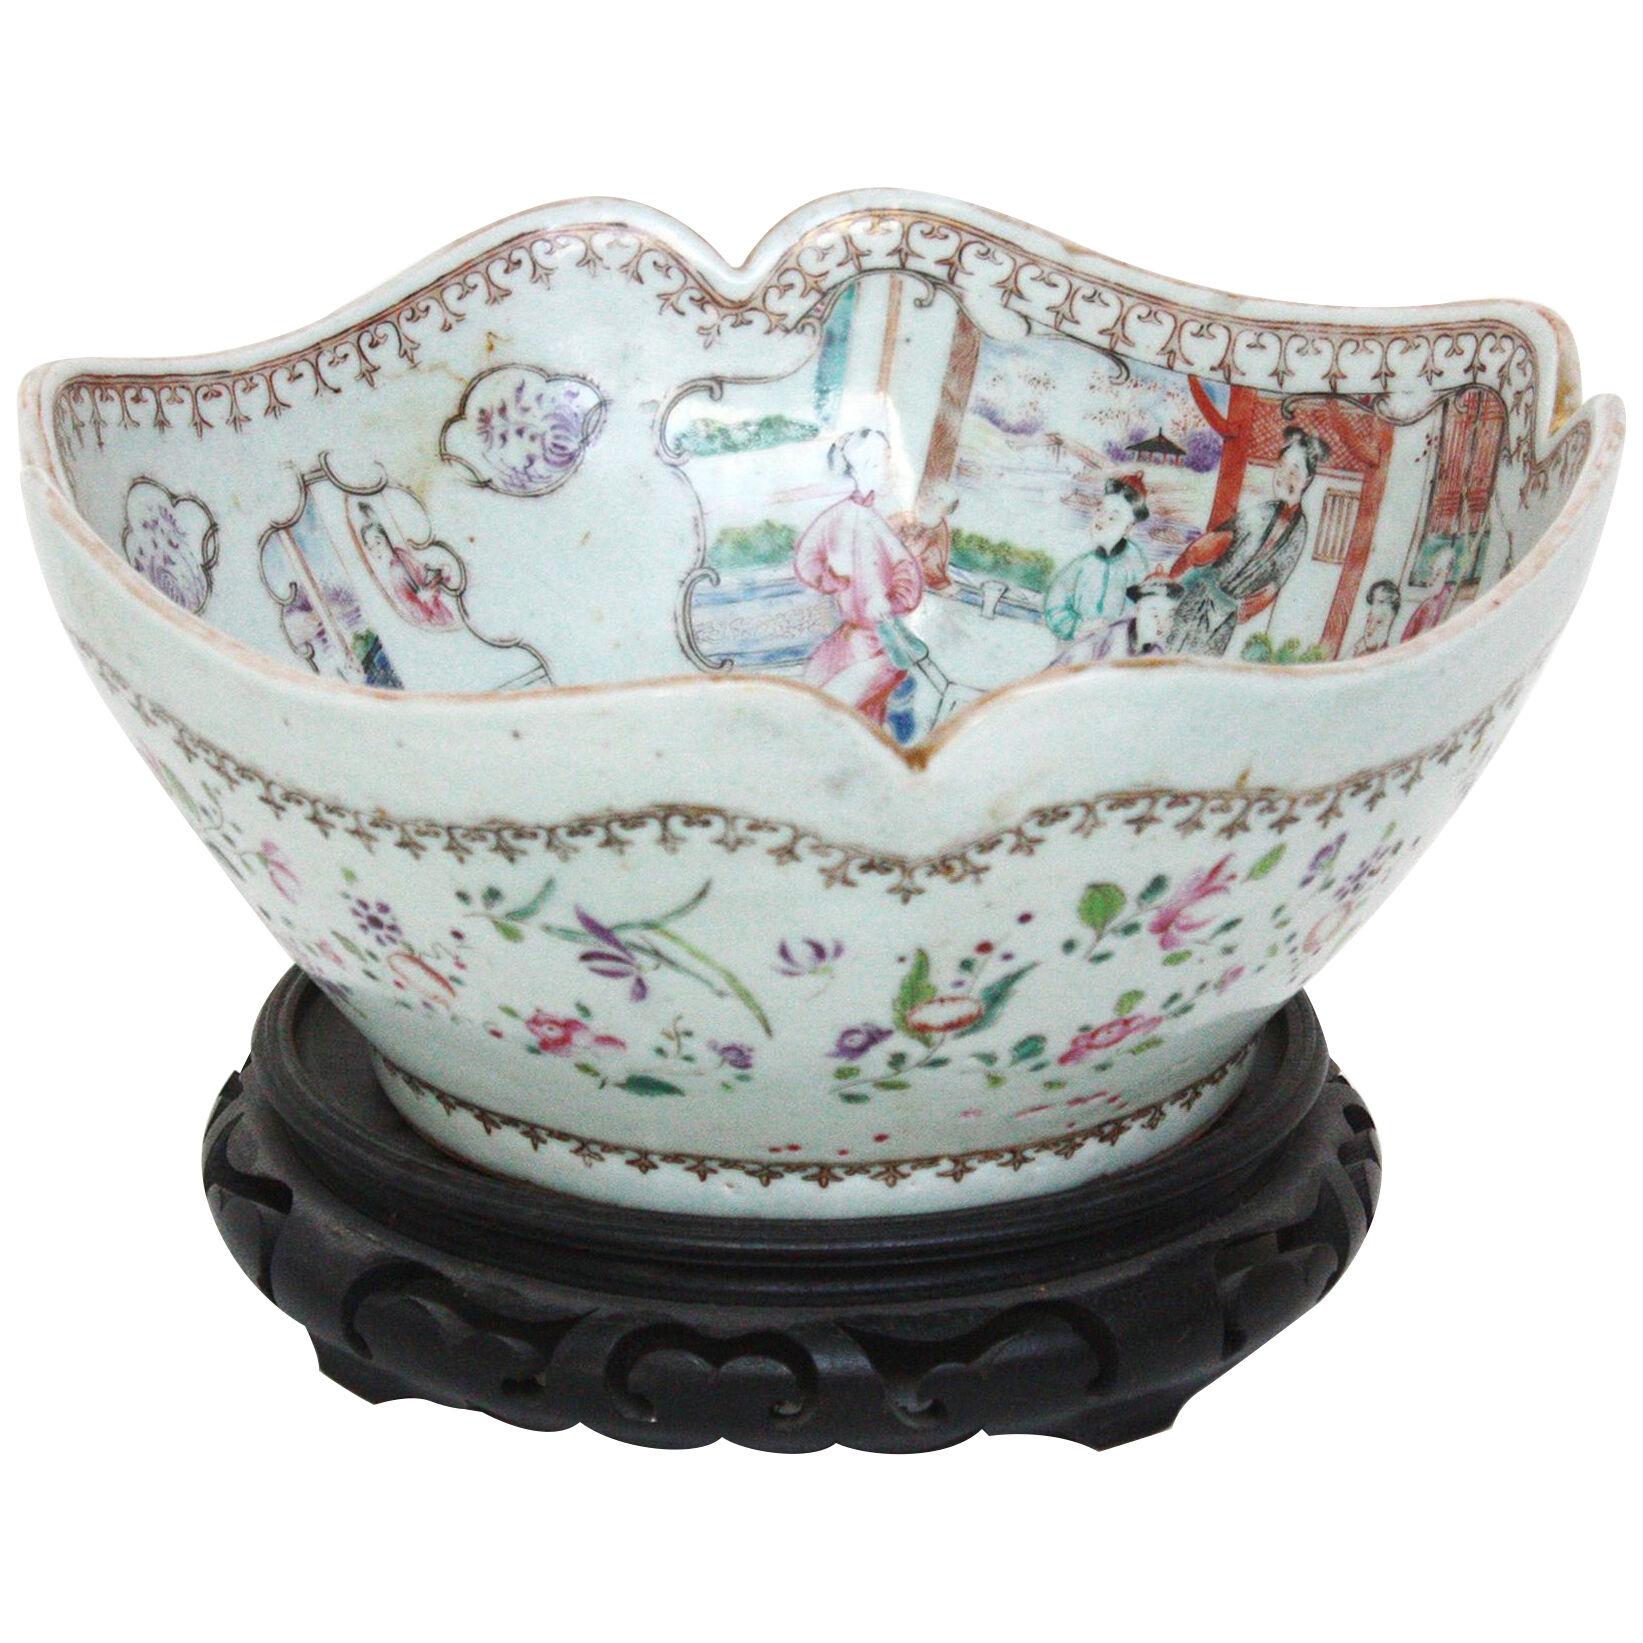 Early 19th Century Chinese Export Bowl